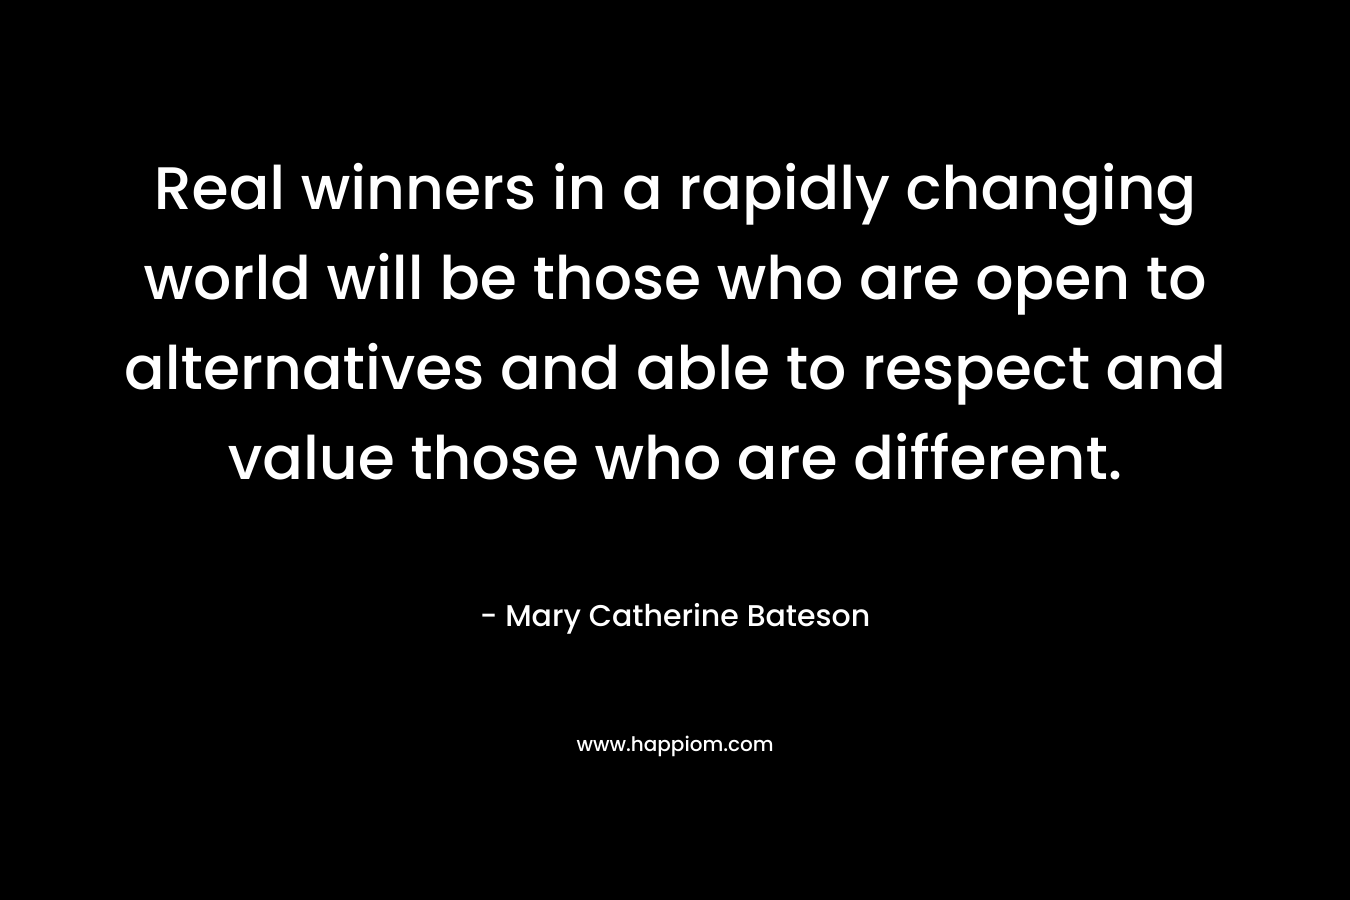 Real winners in a rapidly changing world will be those who are open to alternatives and able to respect and value those who are different. – Mary Catherine Bateson